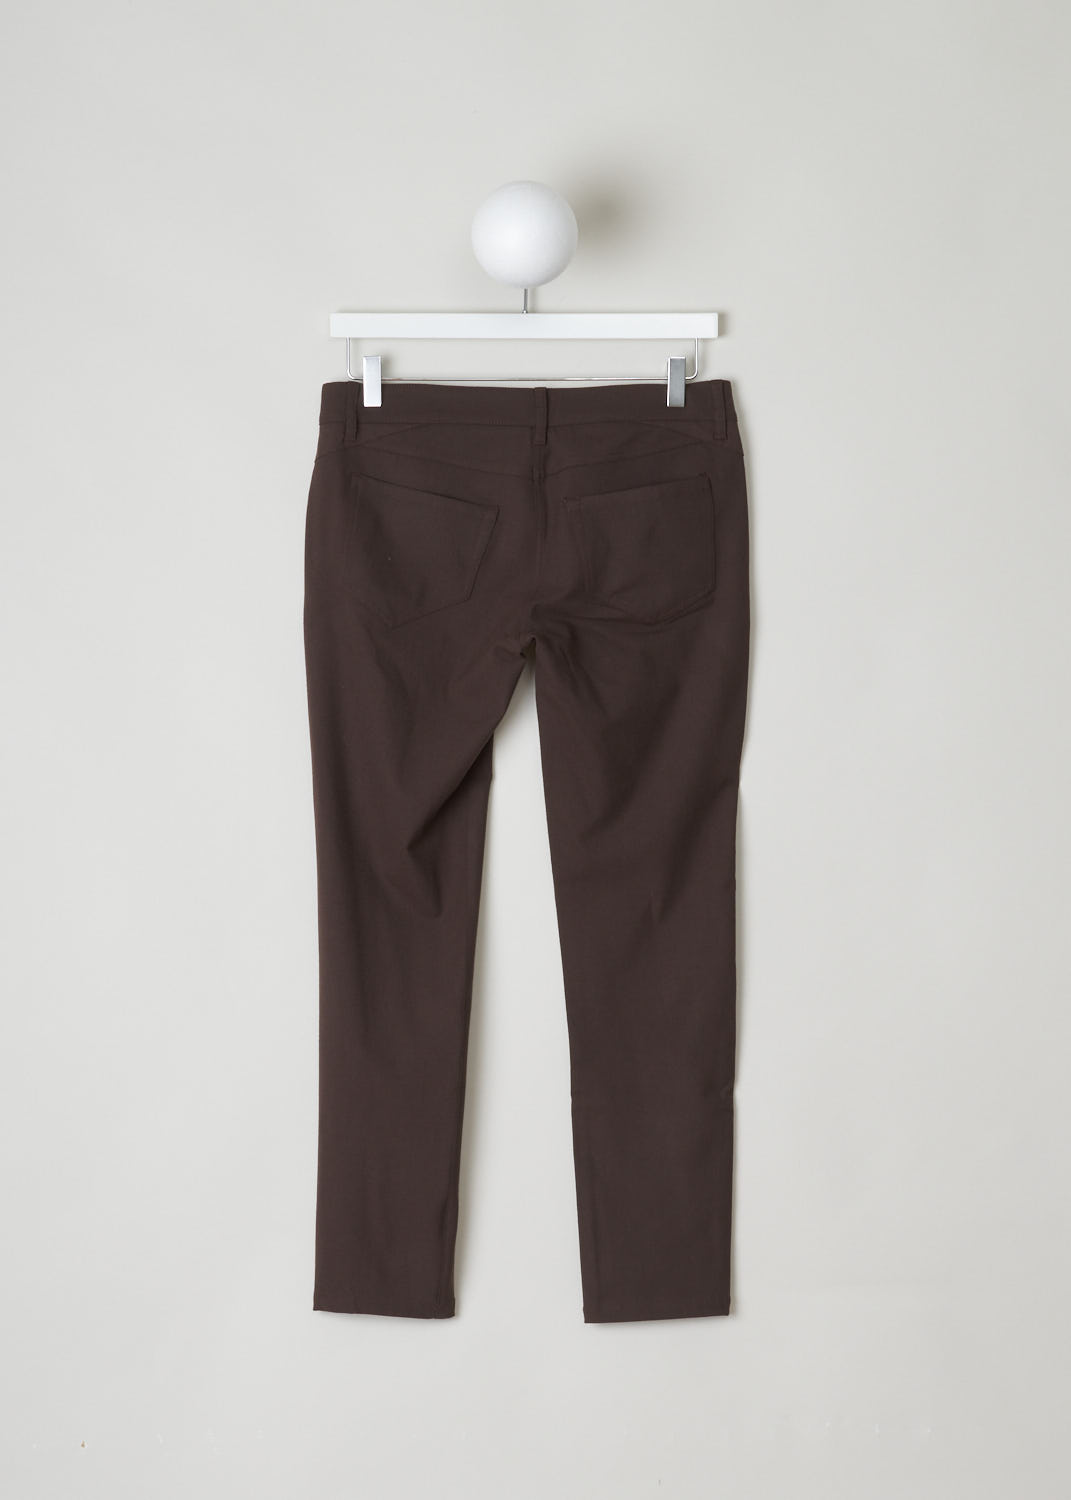 BRUNELLO CUCINELLI, BROWN WOOL PANTS, M0L15P1790_C2630, Brown, Back, Form fitting brown pants made with a wool blend. These pants have a waistband with belt loops. The closure option on these pants is a single button and a concealed zipper. These pants have a traditional five pocket configuration, meaning in the front there are two rounded pockets and a single coin pocket, and two pockets in the back.
